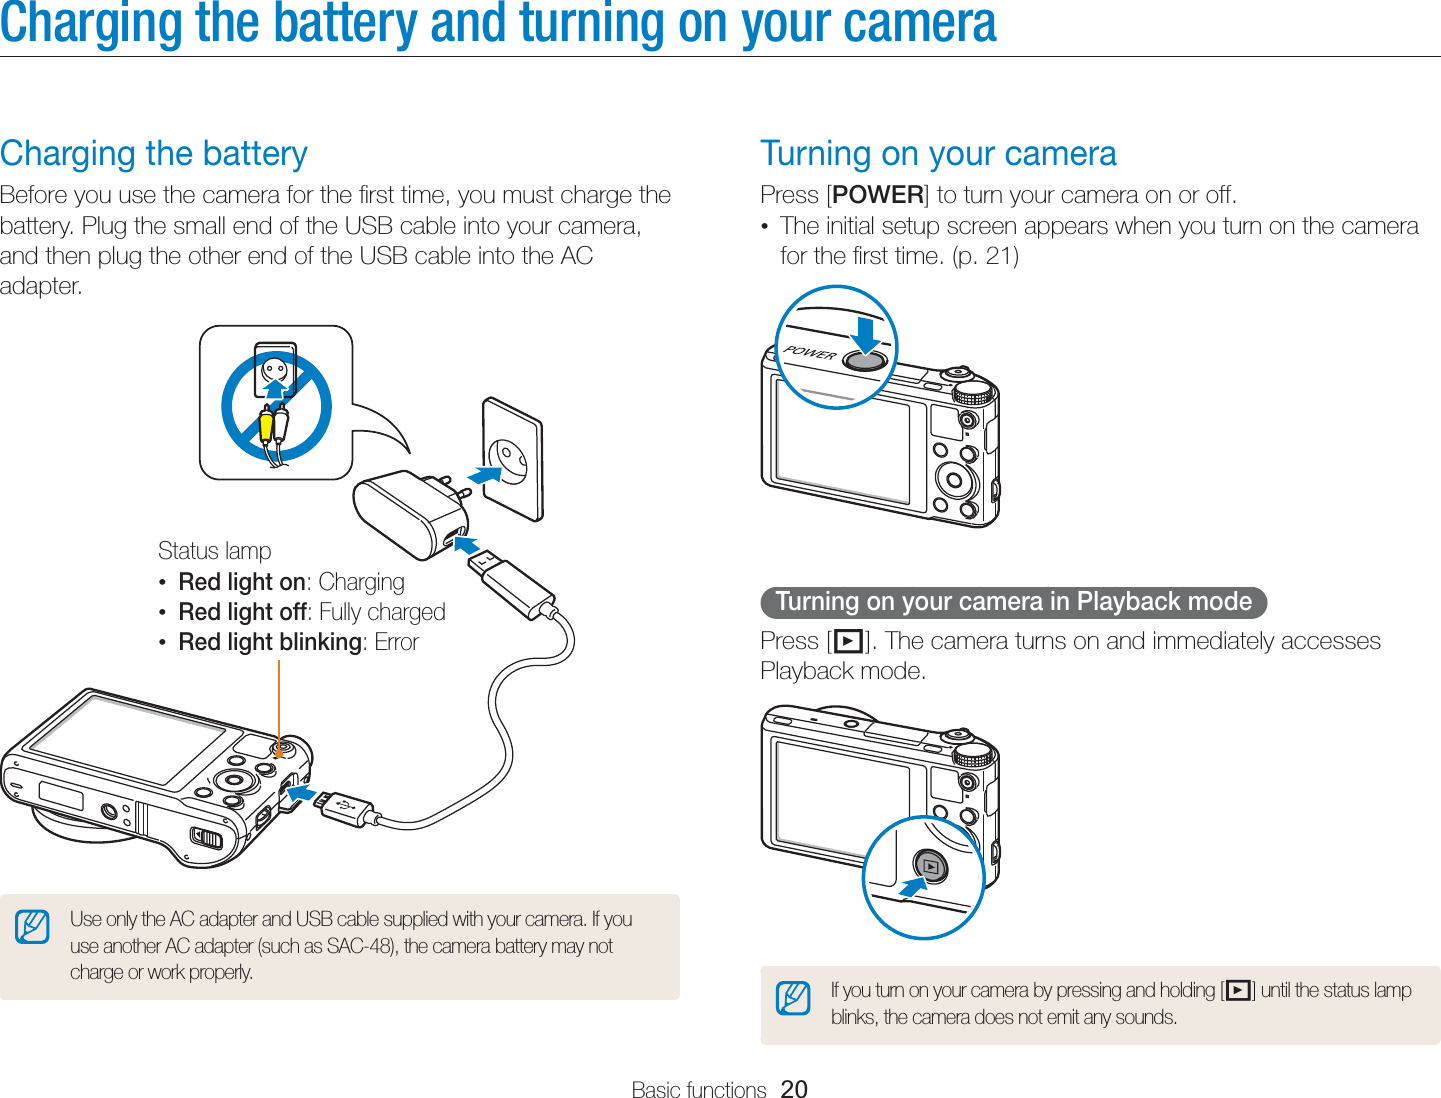 Basic functions  20Charging the battery and turning on your cameraTurning on your cameraPress [POWER] to turn your camera on or off.•  The initial setup screen appears when you turn on the camera for the ﬁrst time. (p. 21)Turning on your camera in Playback modePress [P]. The camera turns on and immediately accesses Playback mode.If you turn on your camera by pressing and holding [P] until the status lamp blinks, the camera does not emit any sounds.Charging the batteryBefore you use the camera for the ﬁrst time, you must charge the battery. Plug the small end of the USB cable into your camera, and then plug the other end of the USB cable into the AC adapter.Status lamp• Red light on: Charging• Red light off: Fully charged• Red light blinking: ErrorUse only the AC adapter and USB cable supplied with your camera. If you use another AC adapter (such as SAC-48), the camera battery may not charge or work properly.